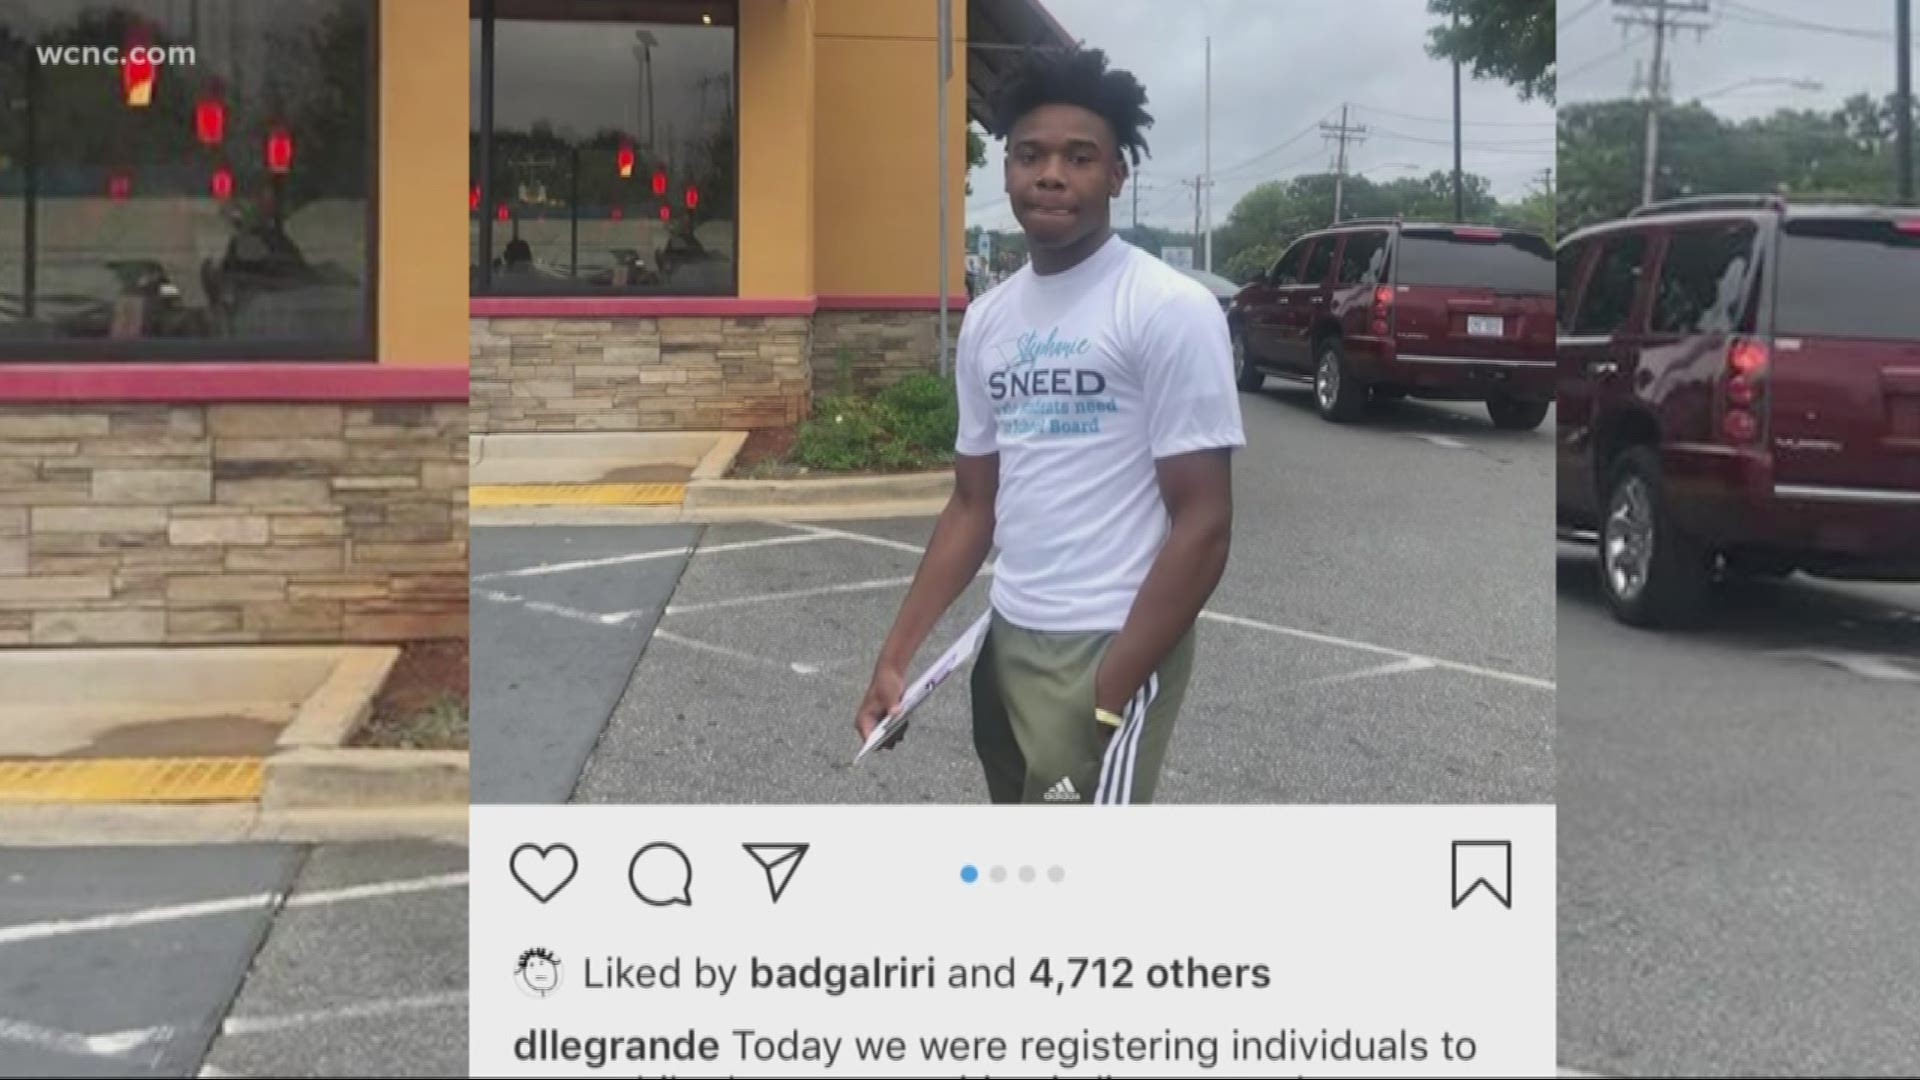 On Saturday alone, he was able to register 16 people. His efforts are now being recognized across the nation after posting photos to his Instagram.